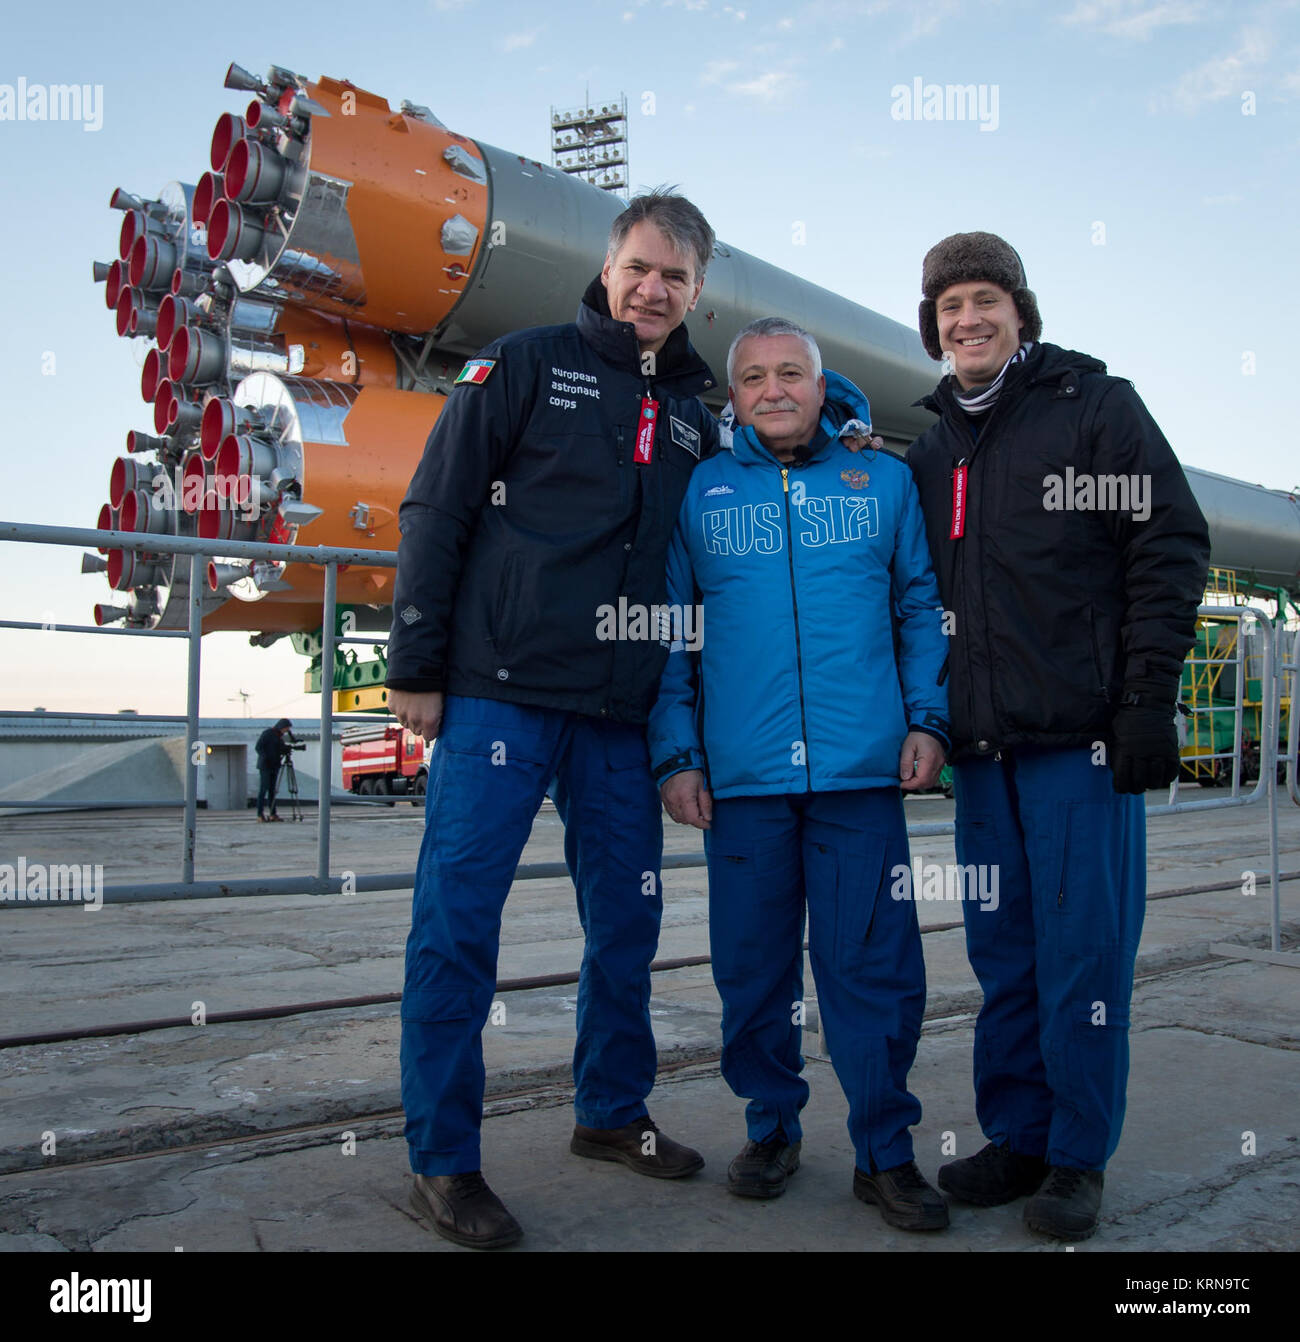 Expedition 50 backup crew members ESA astronaut Paolo Nespoli, left, Russian cosmonaut Fyodor Yurchikhin of Roscosmos, center, and NASA astronaut Jack Fischer pose for a photograph as the Soyuz rocket is rolled out by train to the launch pad at the Baikonur Cosmodrome, Kazakhstan, Monday, Nov. 14, 2016. NASA astronaut Peggy Whitson, Russian cosmonaut Oleg Novitskiy of Roscosmos, and ESA astronaut Thomas Pesquet will launch from the Baikonur Cosmodrome in Kazakhstan the morning of November 18 (Kazakh time.) All three will spend approximately six months on the orbital complex. Photo Credit: (NAS Stock Photo